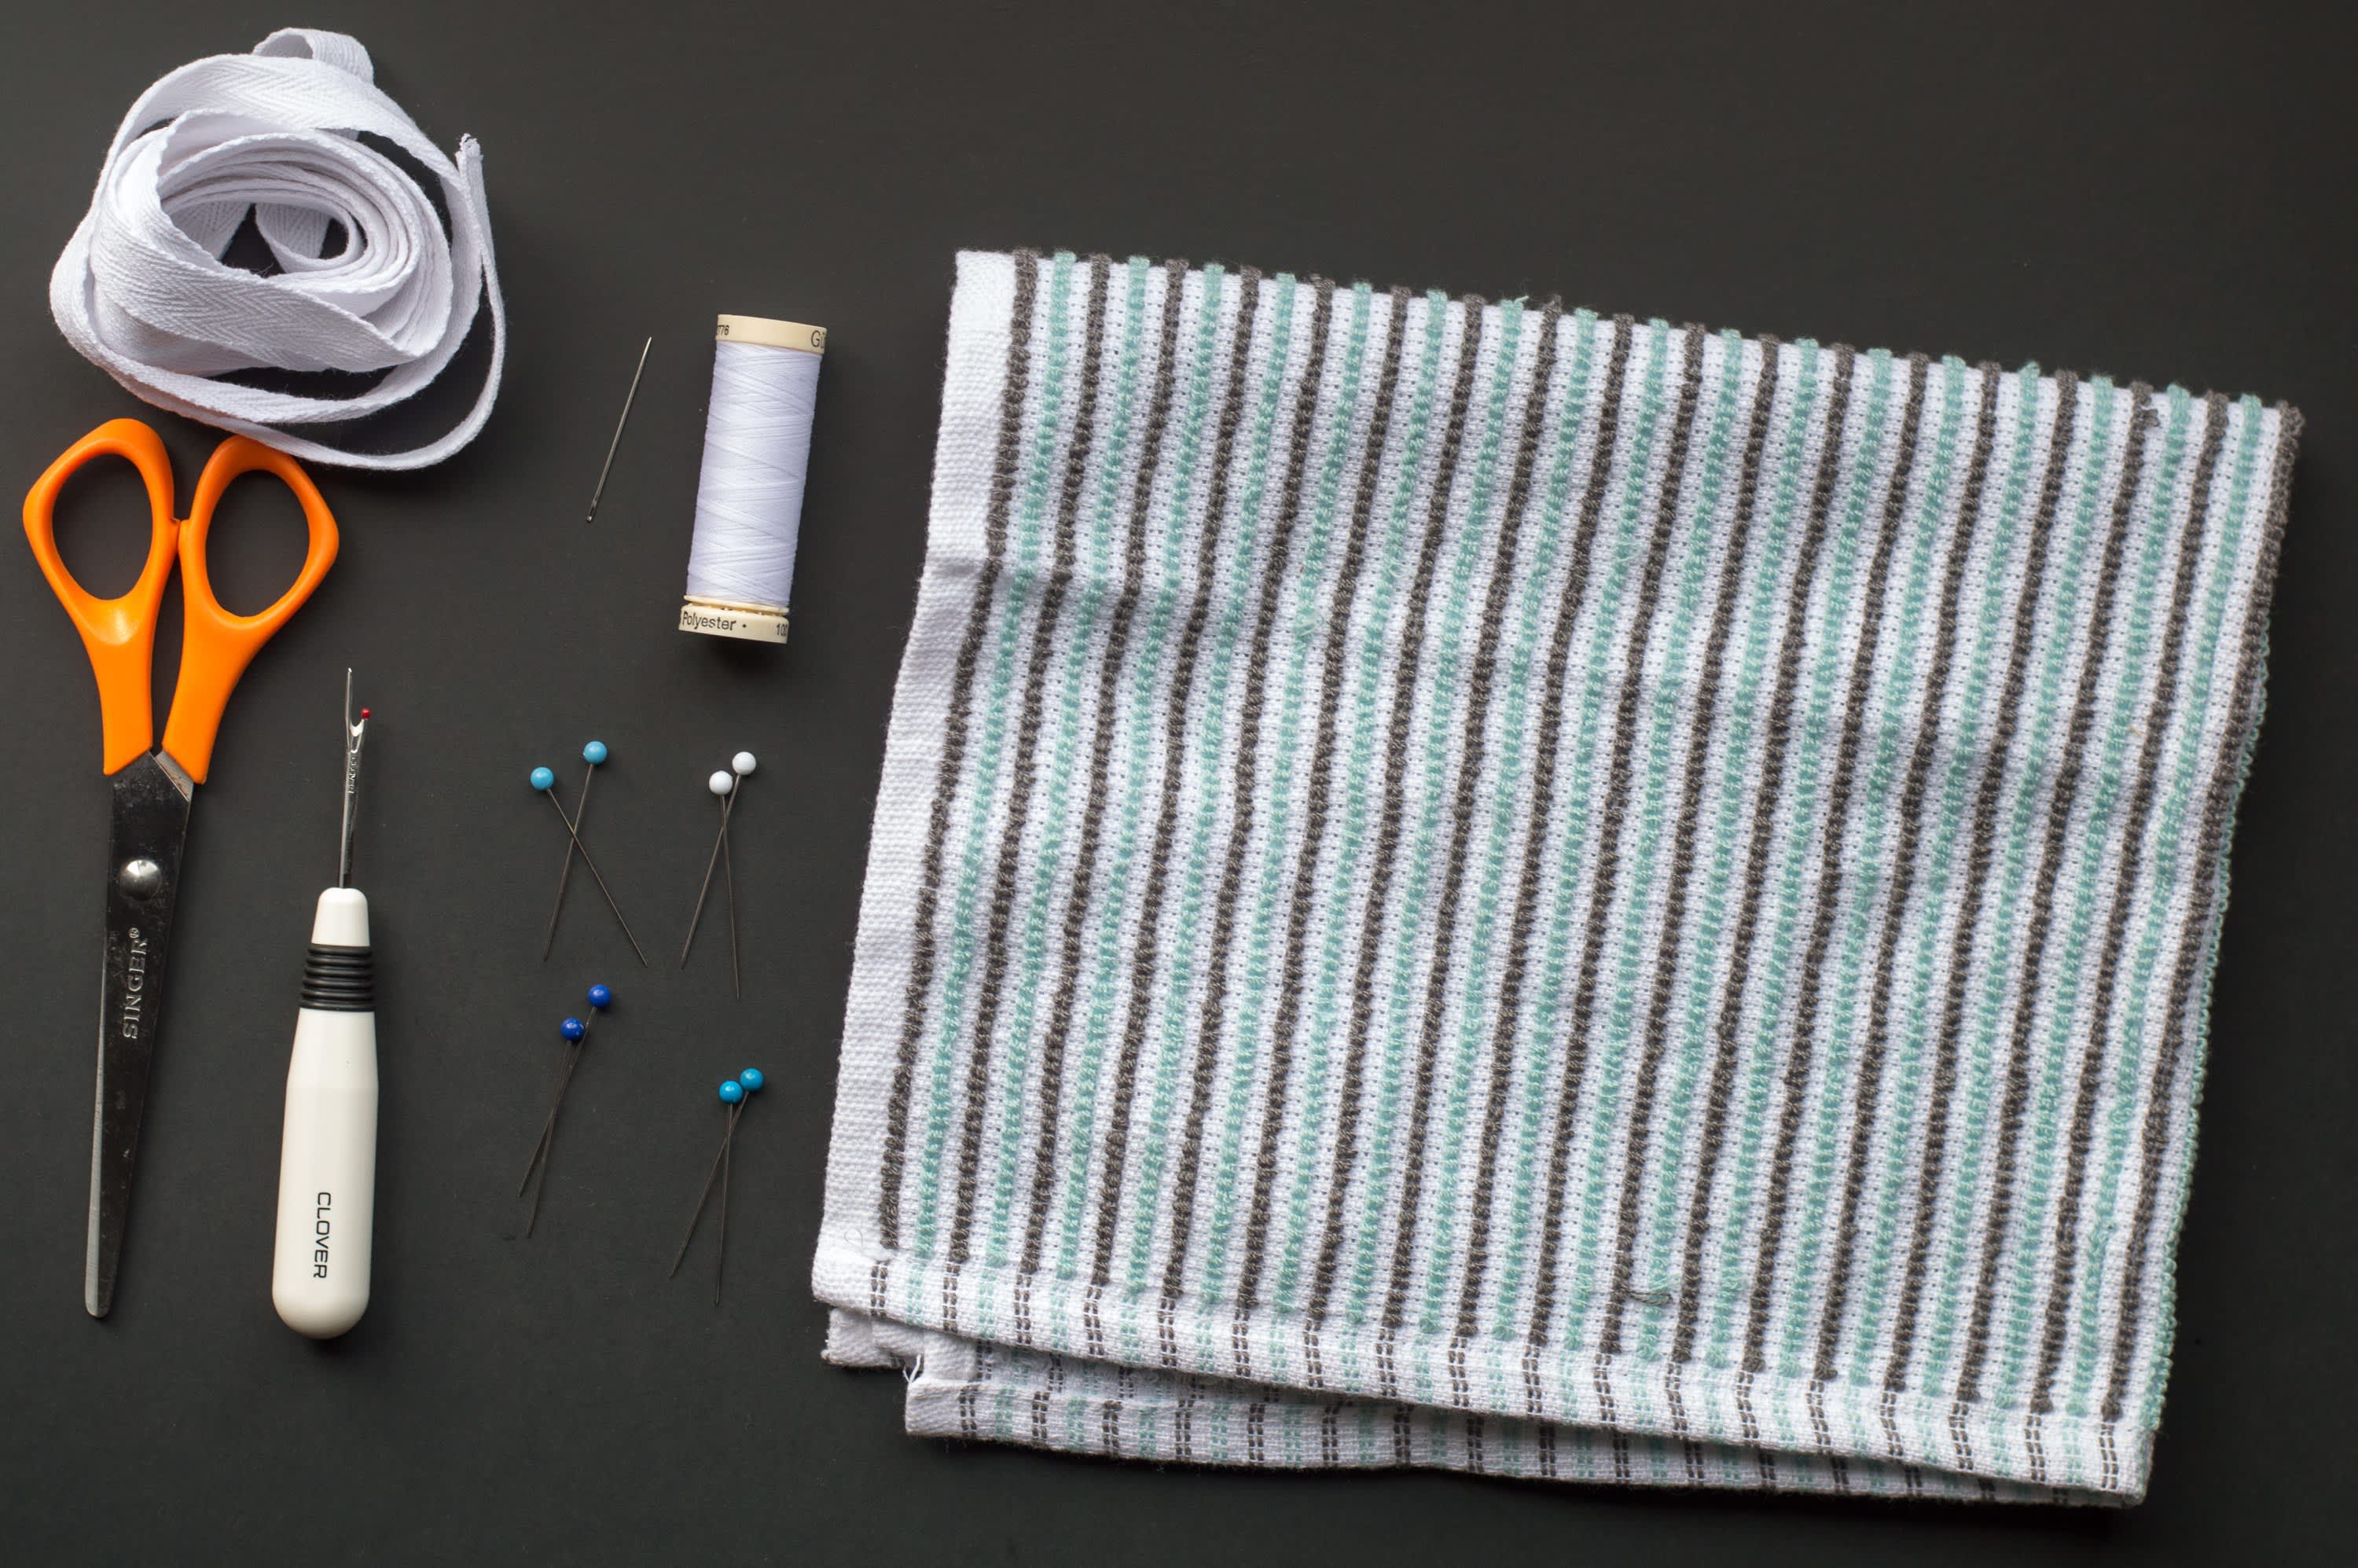 make: restore your sanity in 15 minutes {add loops to towels for